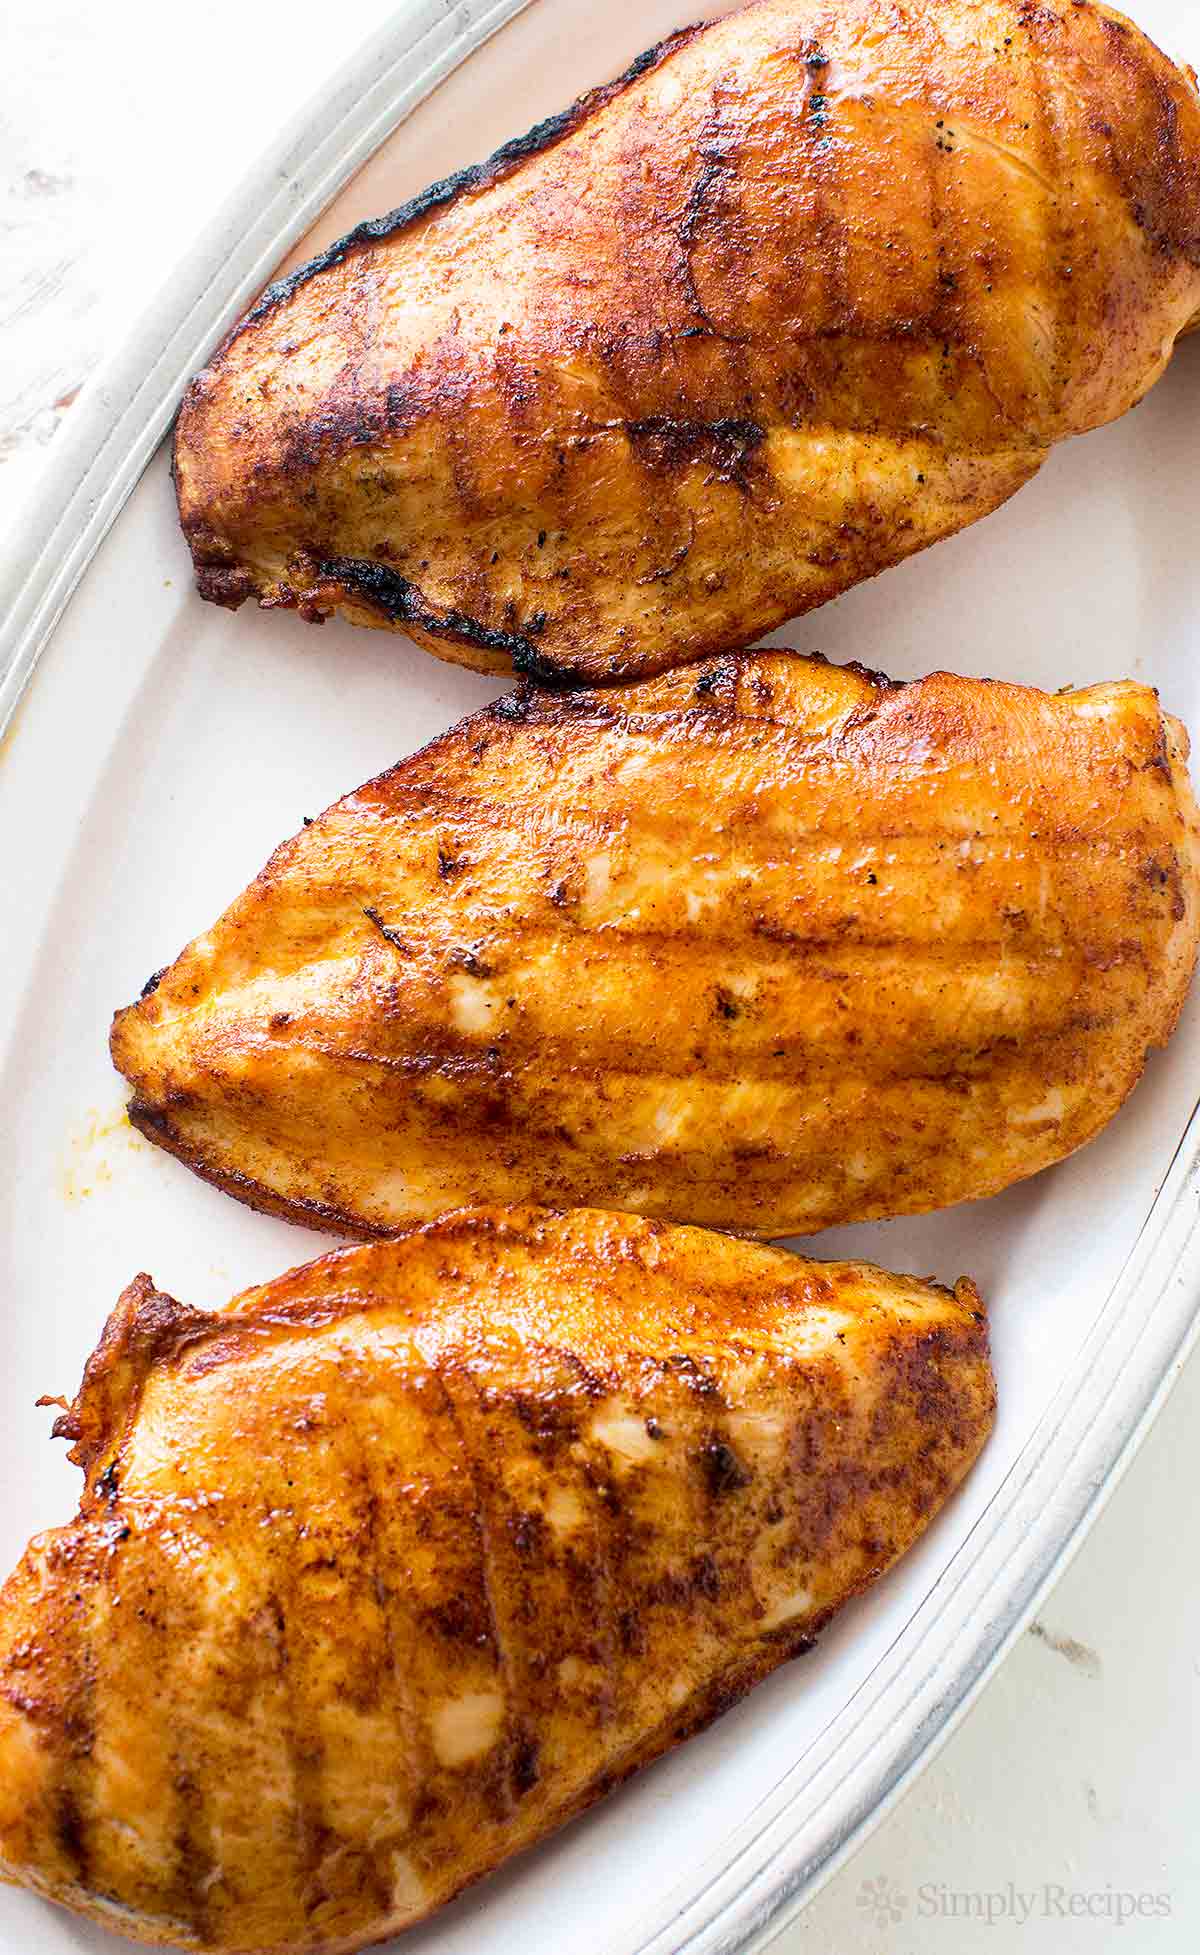 How to grill chicken breast